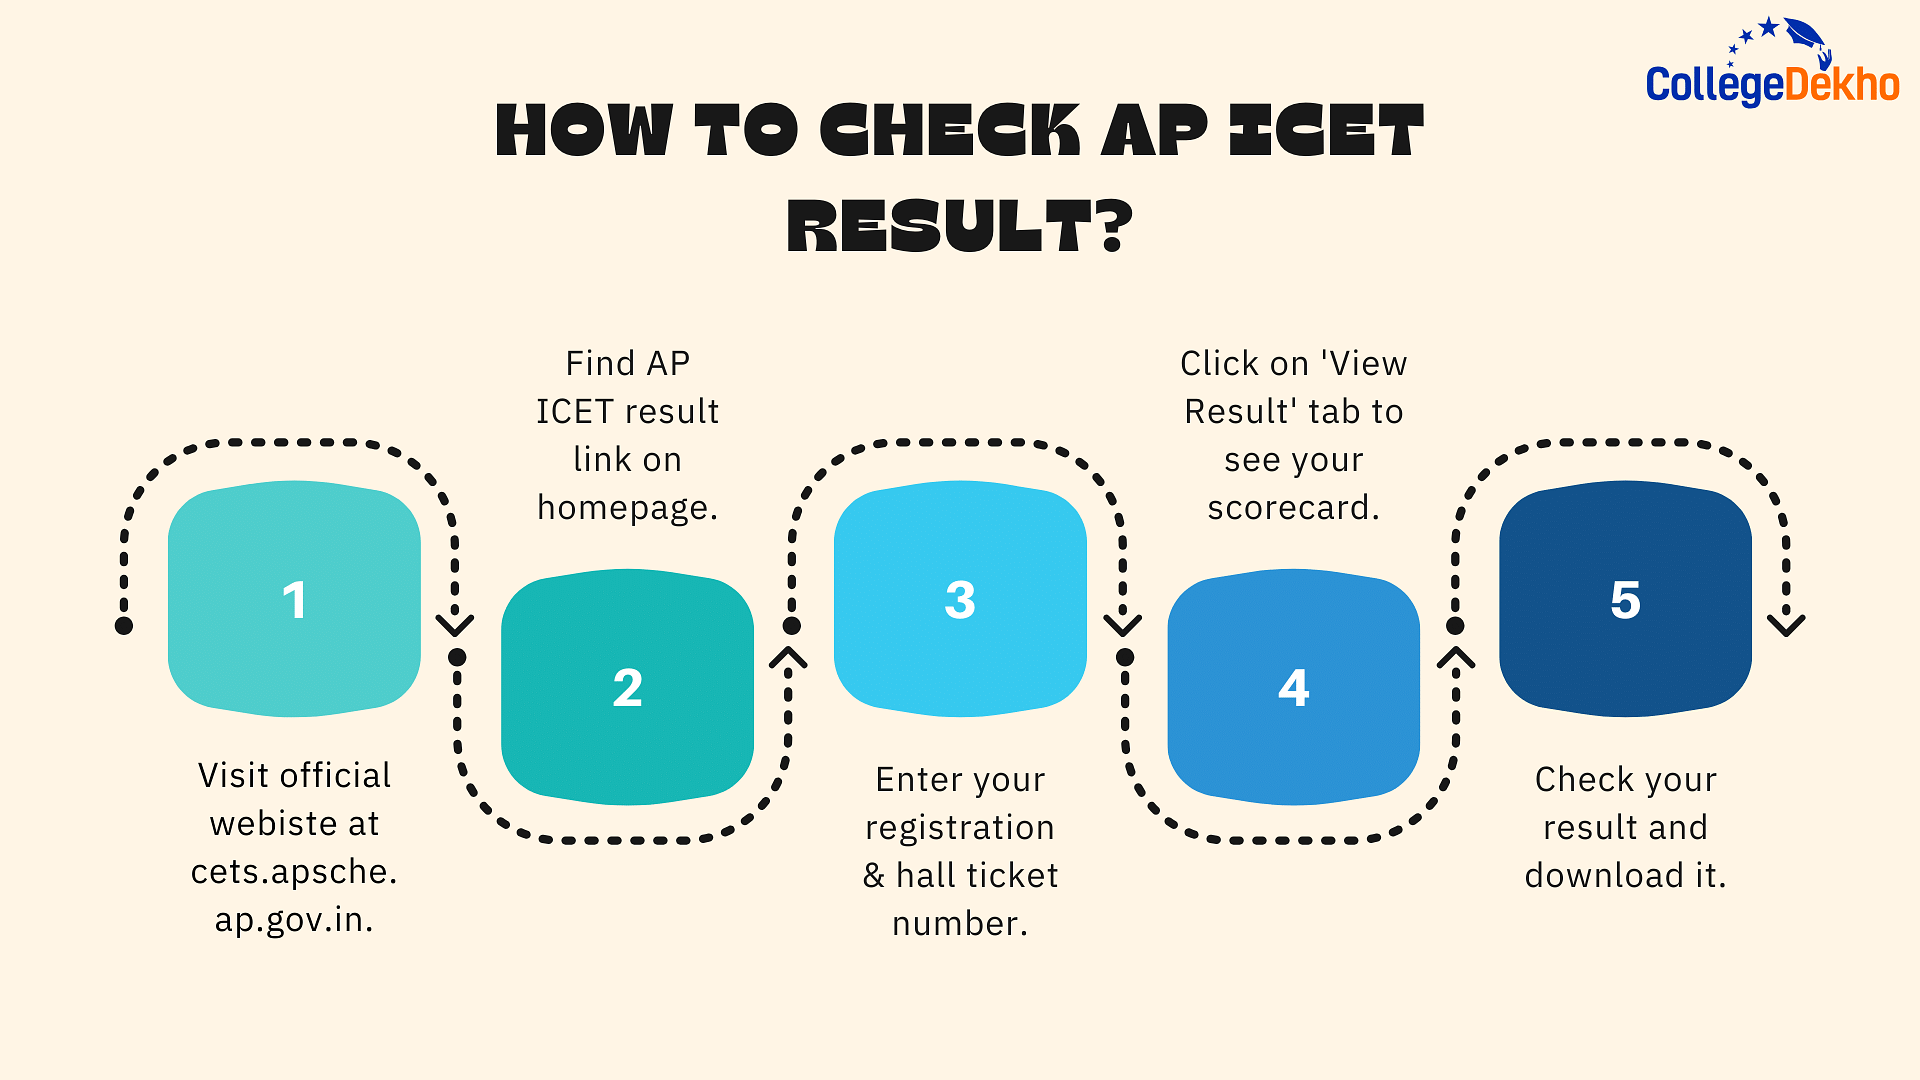 How to Check AP ICET Result?